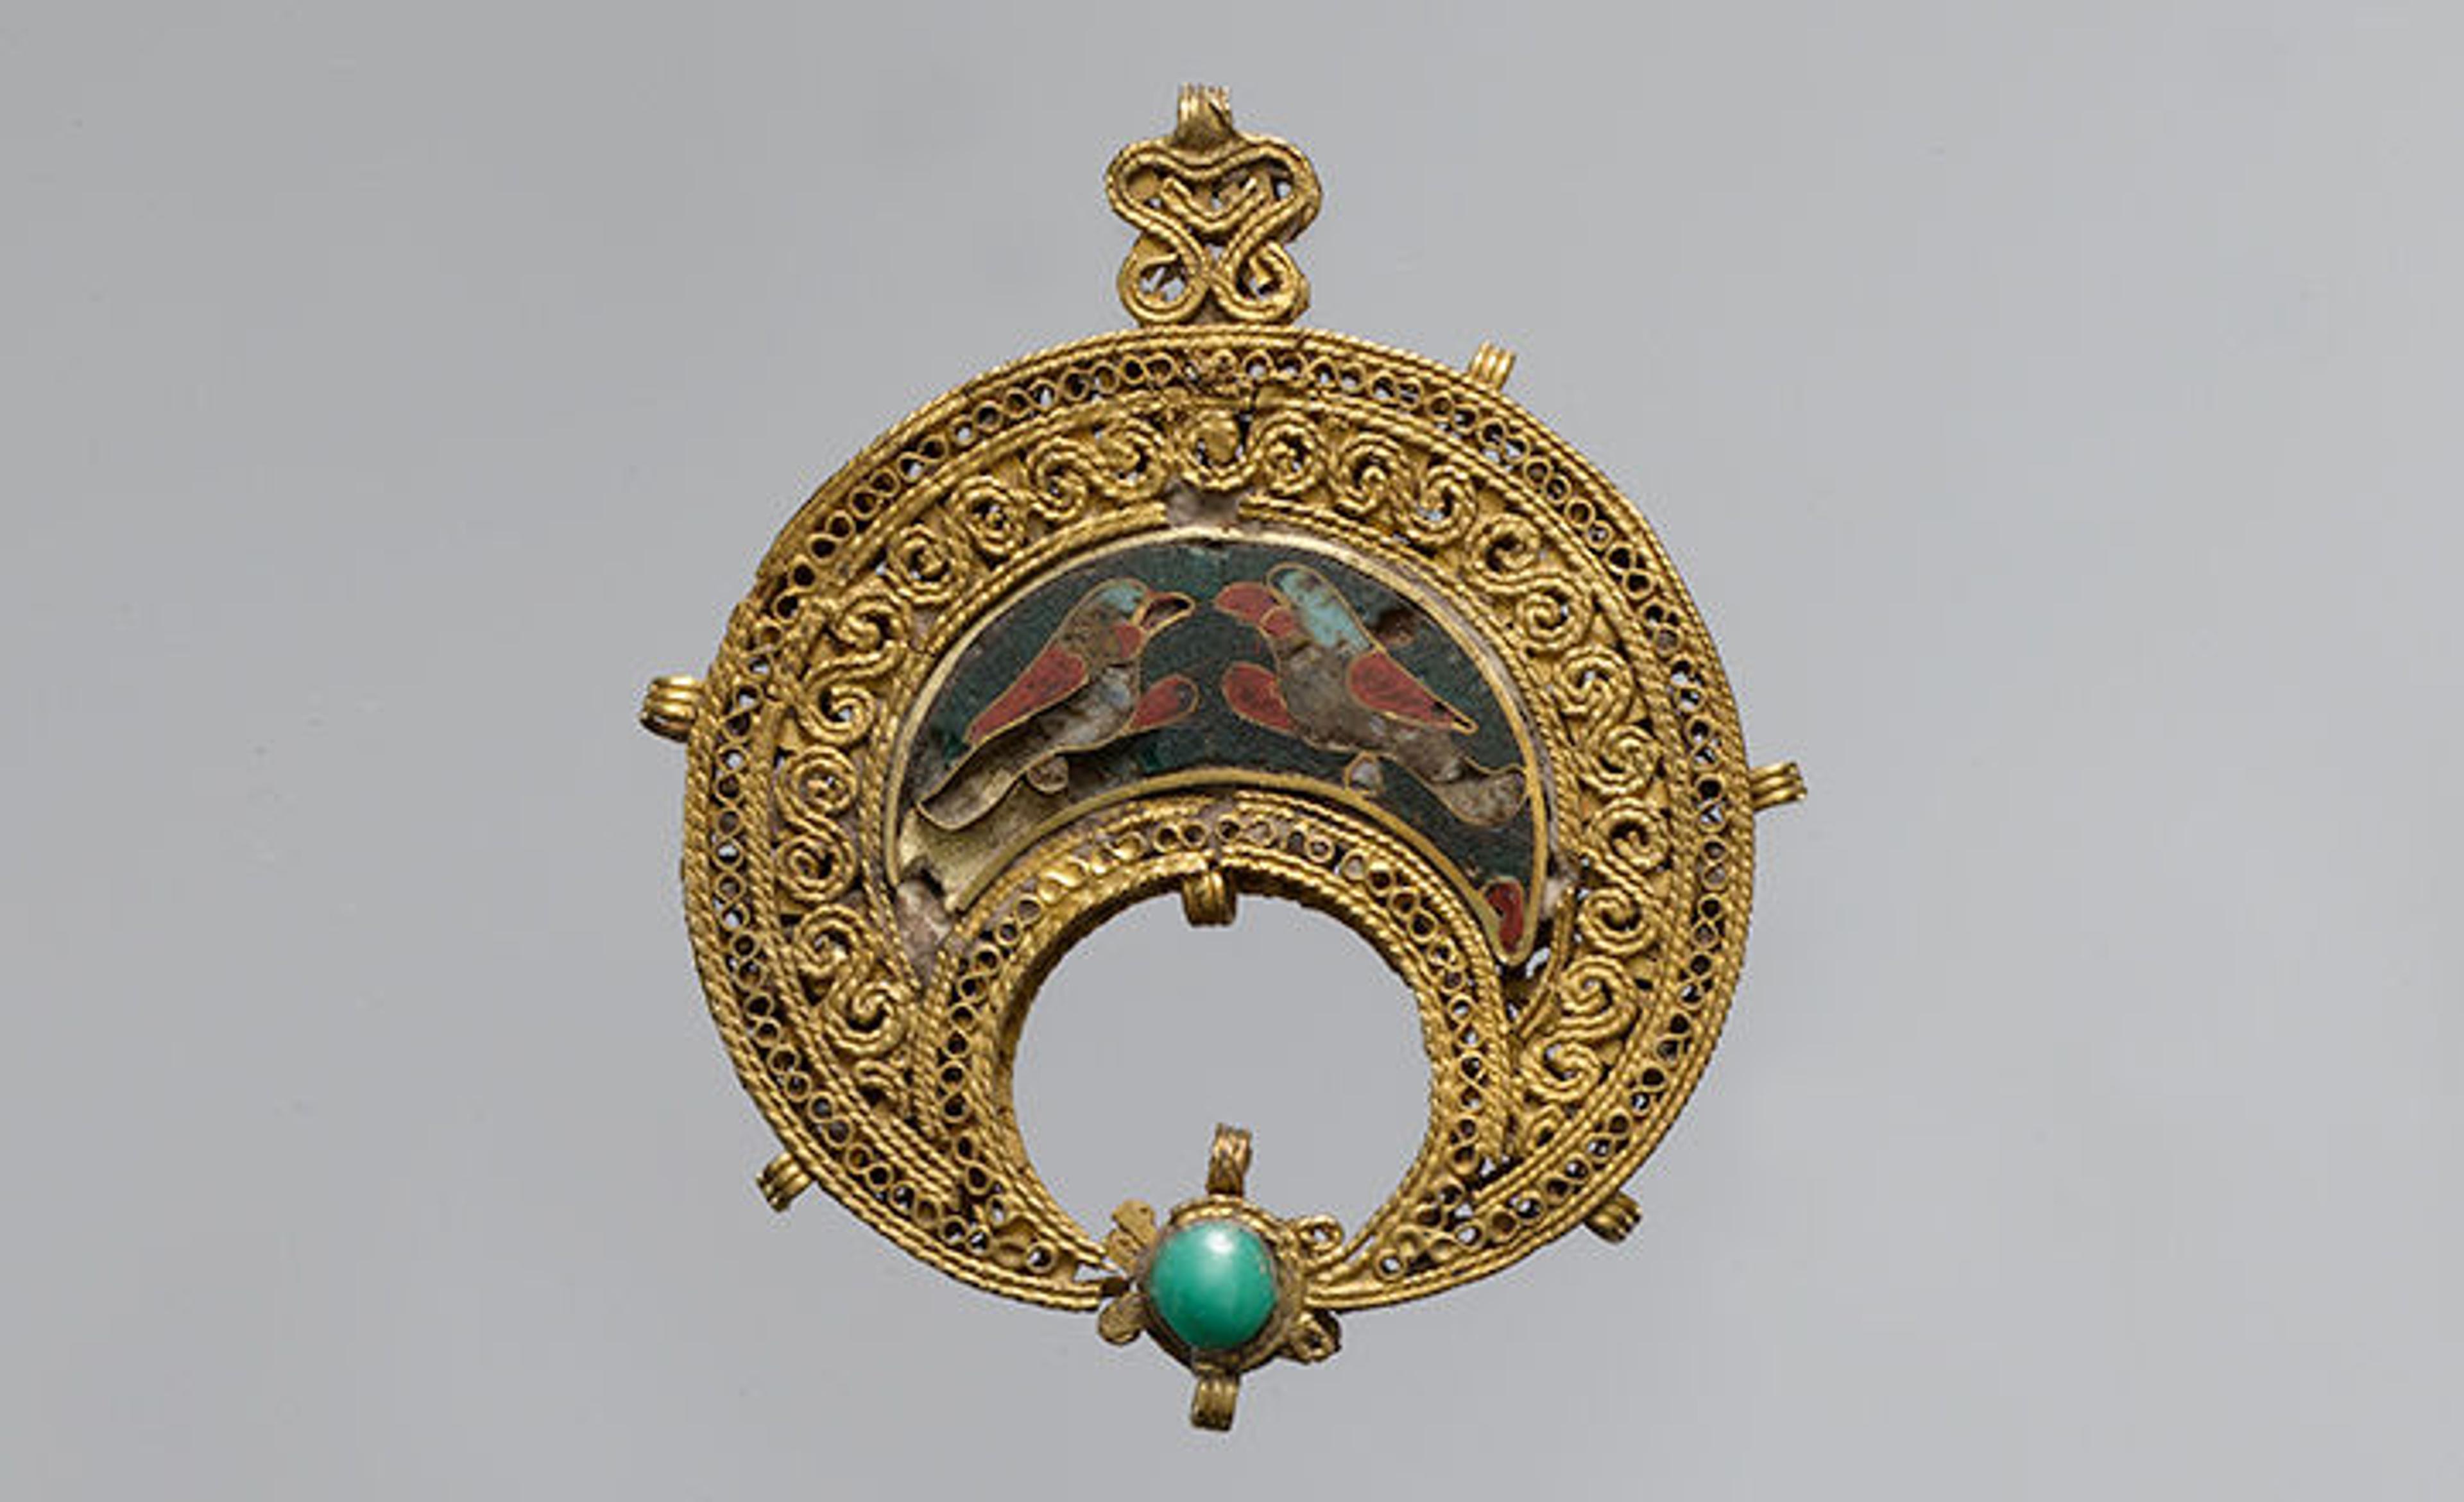 Crescent-Shaped Pendant with Confronted Birds